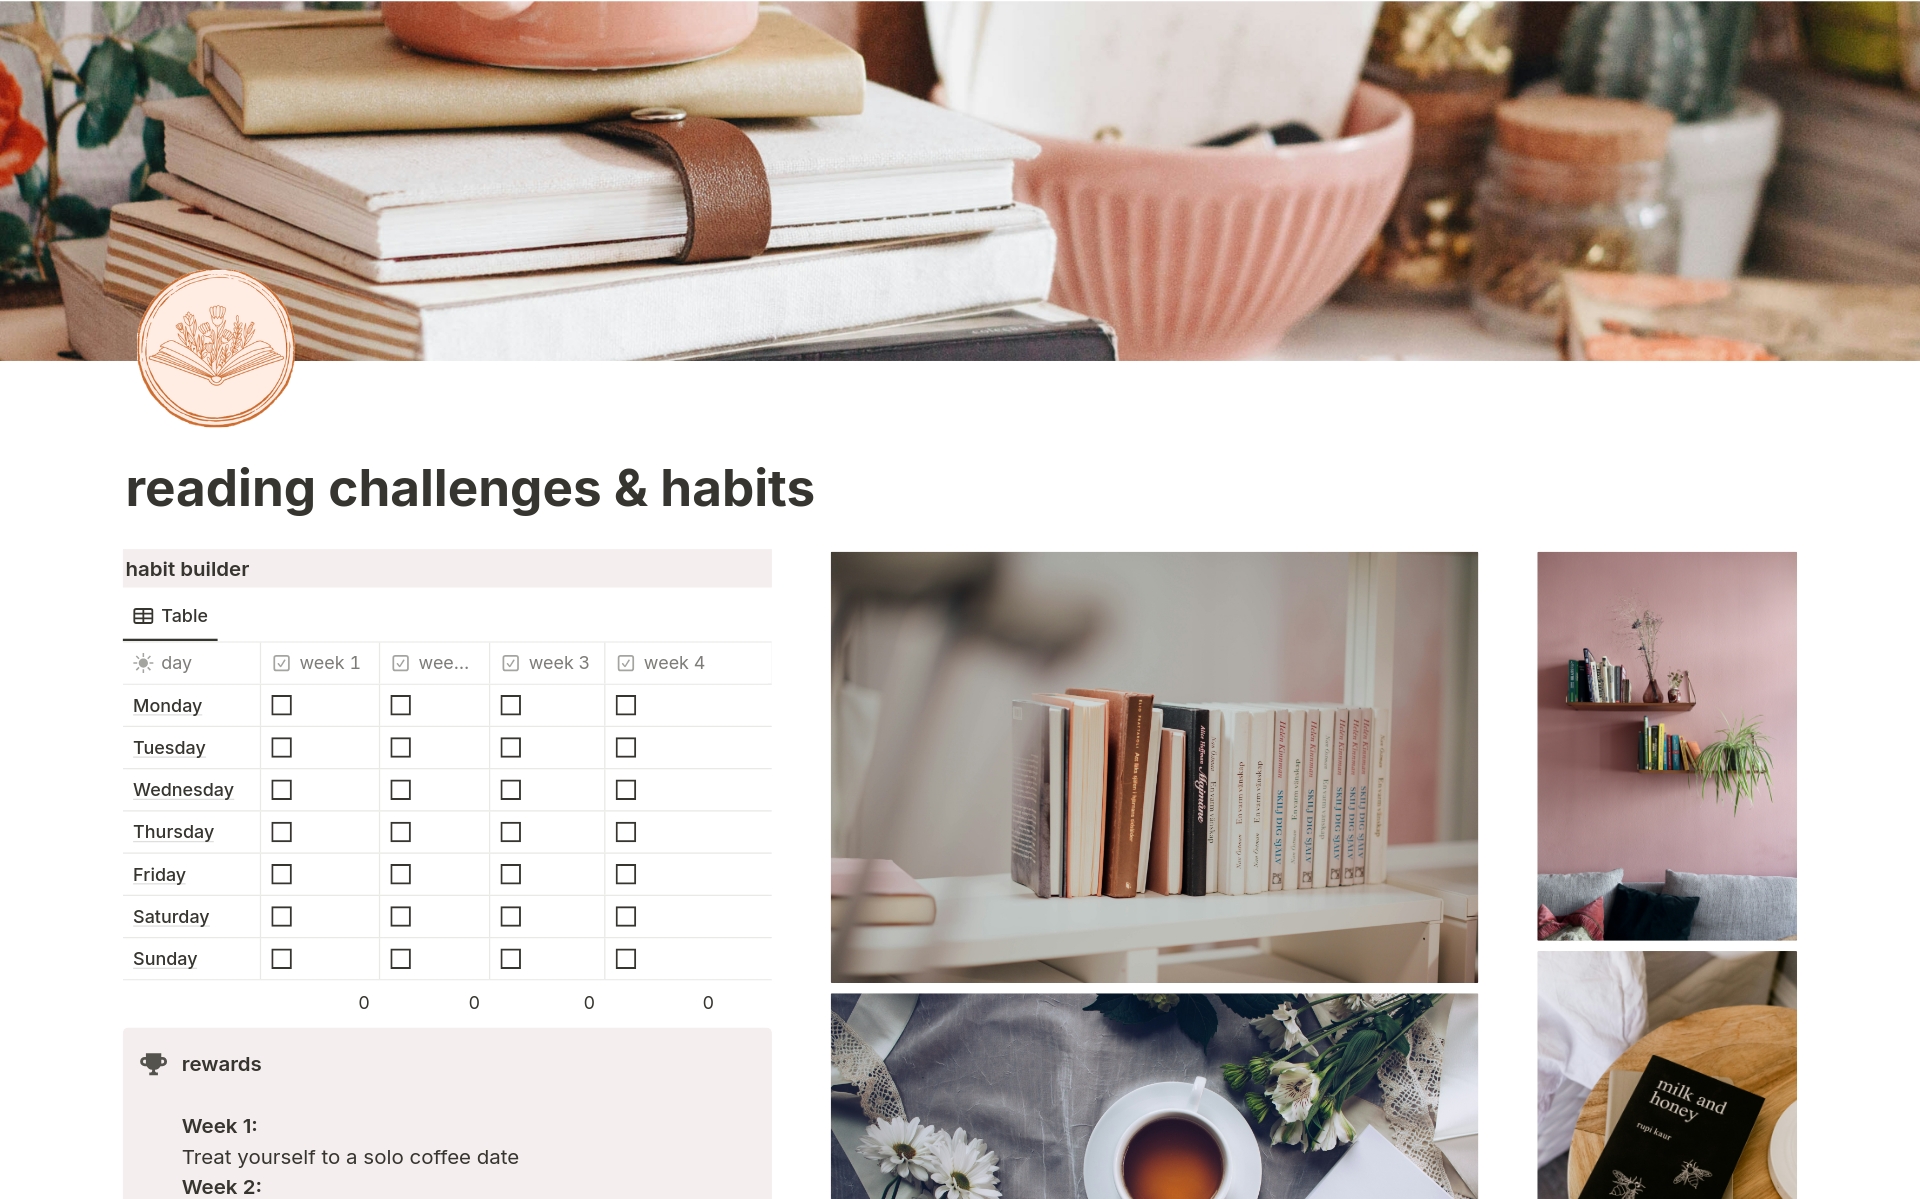 Introducing the Bloomery Studio's Digital Library in Notion - A cosy reading journal in Notion  - the perfect companion for book lovers seeking a delightful and organised reading experience. Track progress, reach goals, take on new challenges & more.